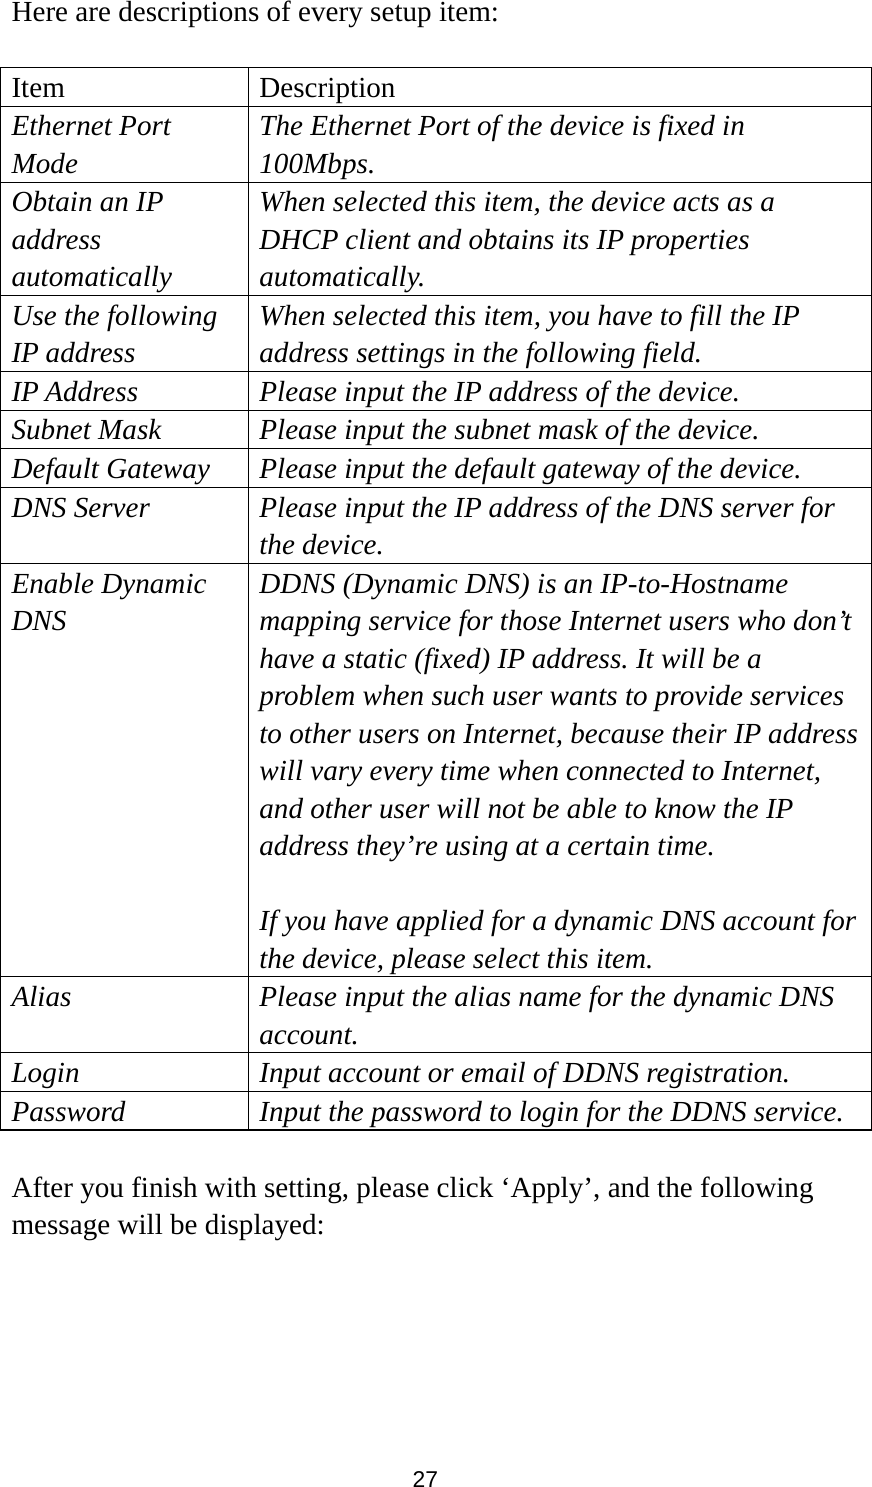 27 Here are descriptions of every setup item:  Item Description Ethernet Port Mode The Ethernet Port of the device is fixed in 100Mbps. Obtain an IP address automatically When selected this item, the device acts as a DHCP client and obtains its IP properties automatically. Use the following IP address When selected this item, you have to fill the IP address settings in the following field. IP Address Please input the IP address of the device. Subnet Mask Please input the subnet mask of the device.   Default Gateway Please input the default gateway of the device. DNS Server  Please input the IP address of the DNS server for the device. Enable Dynamic DNS DDNS (Dynamic DNS) is an IP-to-Hostname mapping service for those Internet users who don’t have a static (fixed) IP address. It will be a problem when such user wants to provide services to other users on Internet, because their IP address will vary every time when connected to Internet, and other user will not be able to know the IP address they’re using at a certain time.  If you have applied for a dynamic DNS account for the device, please select this item.   Alias  Please input the alias name for the dynamic DNS account. Login  Input account or email of DDNS registration. Password  Input the password to login for the DDNS service.  After you finish with setting, please click ‘Apply’, and the following message will be displayed:  